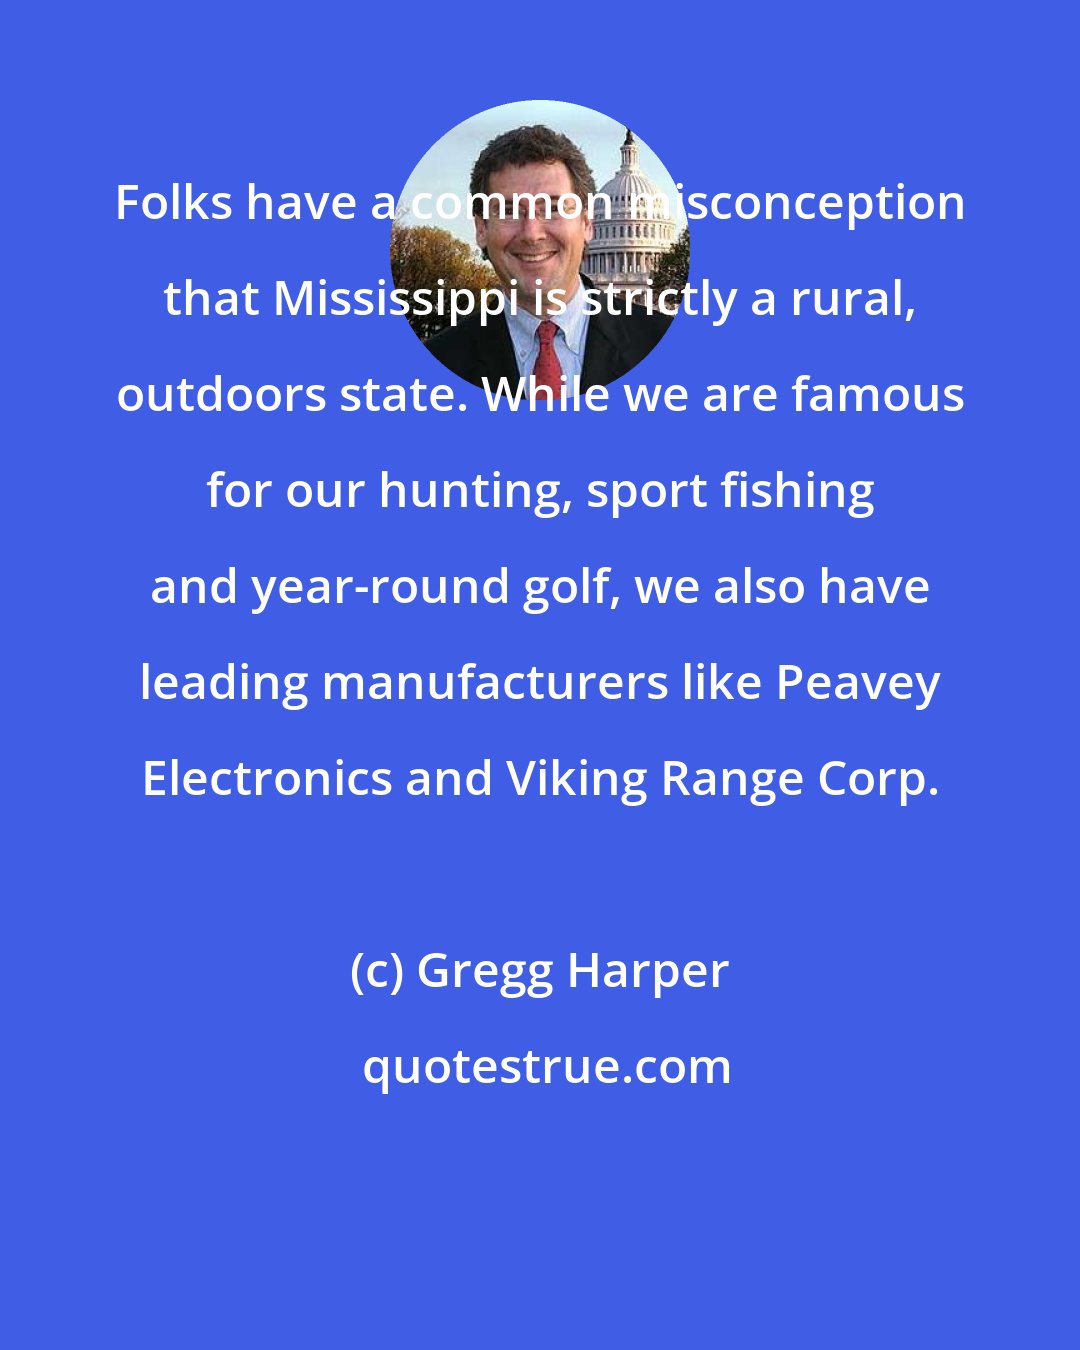 Gregg Harper: Folks have a common misconception that Mississippi is strictly a rural, outdoors state. While we are famous for our hunting, sport fishing and year-round golf, we also have leading manufacturers like Peavey Electronics and Viking Range Corp.